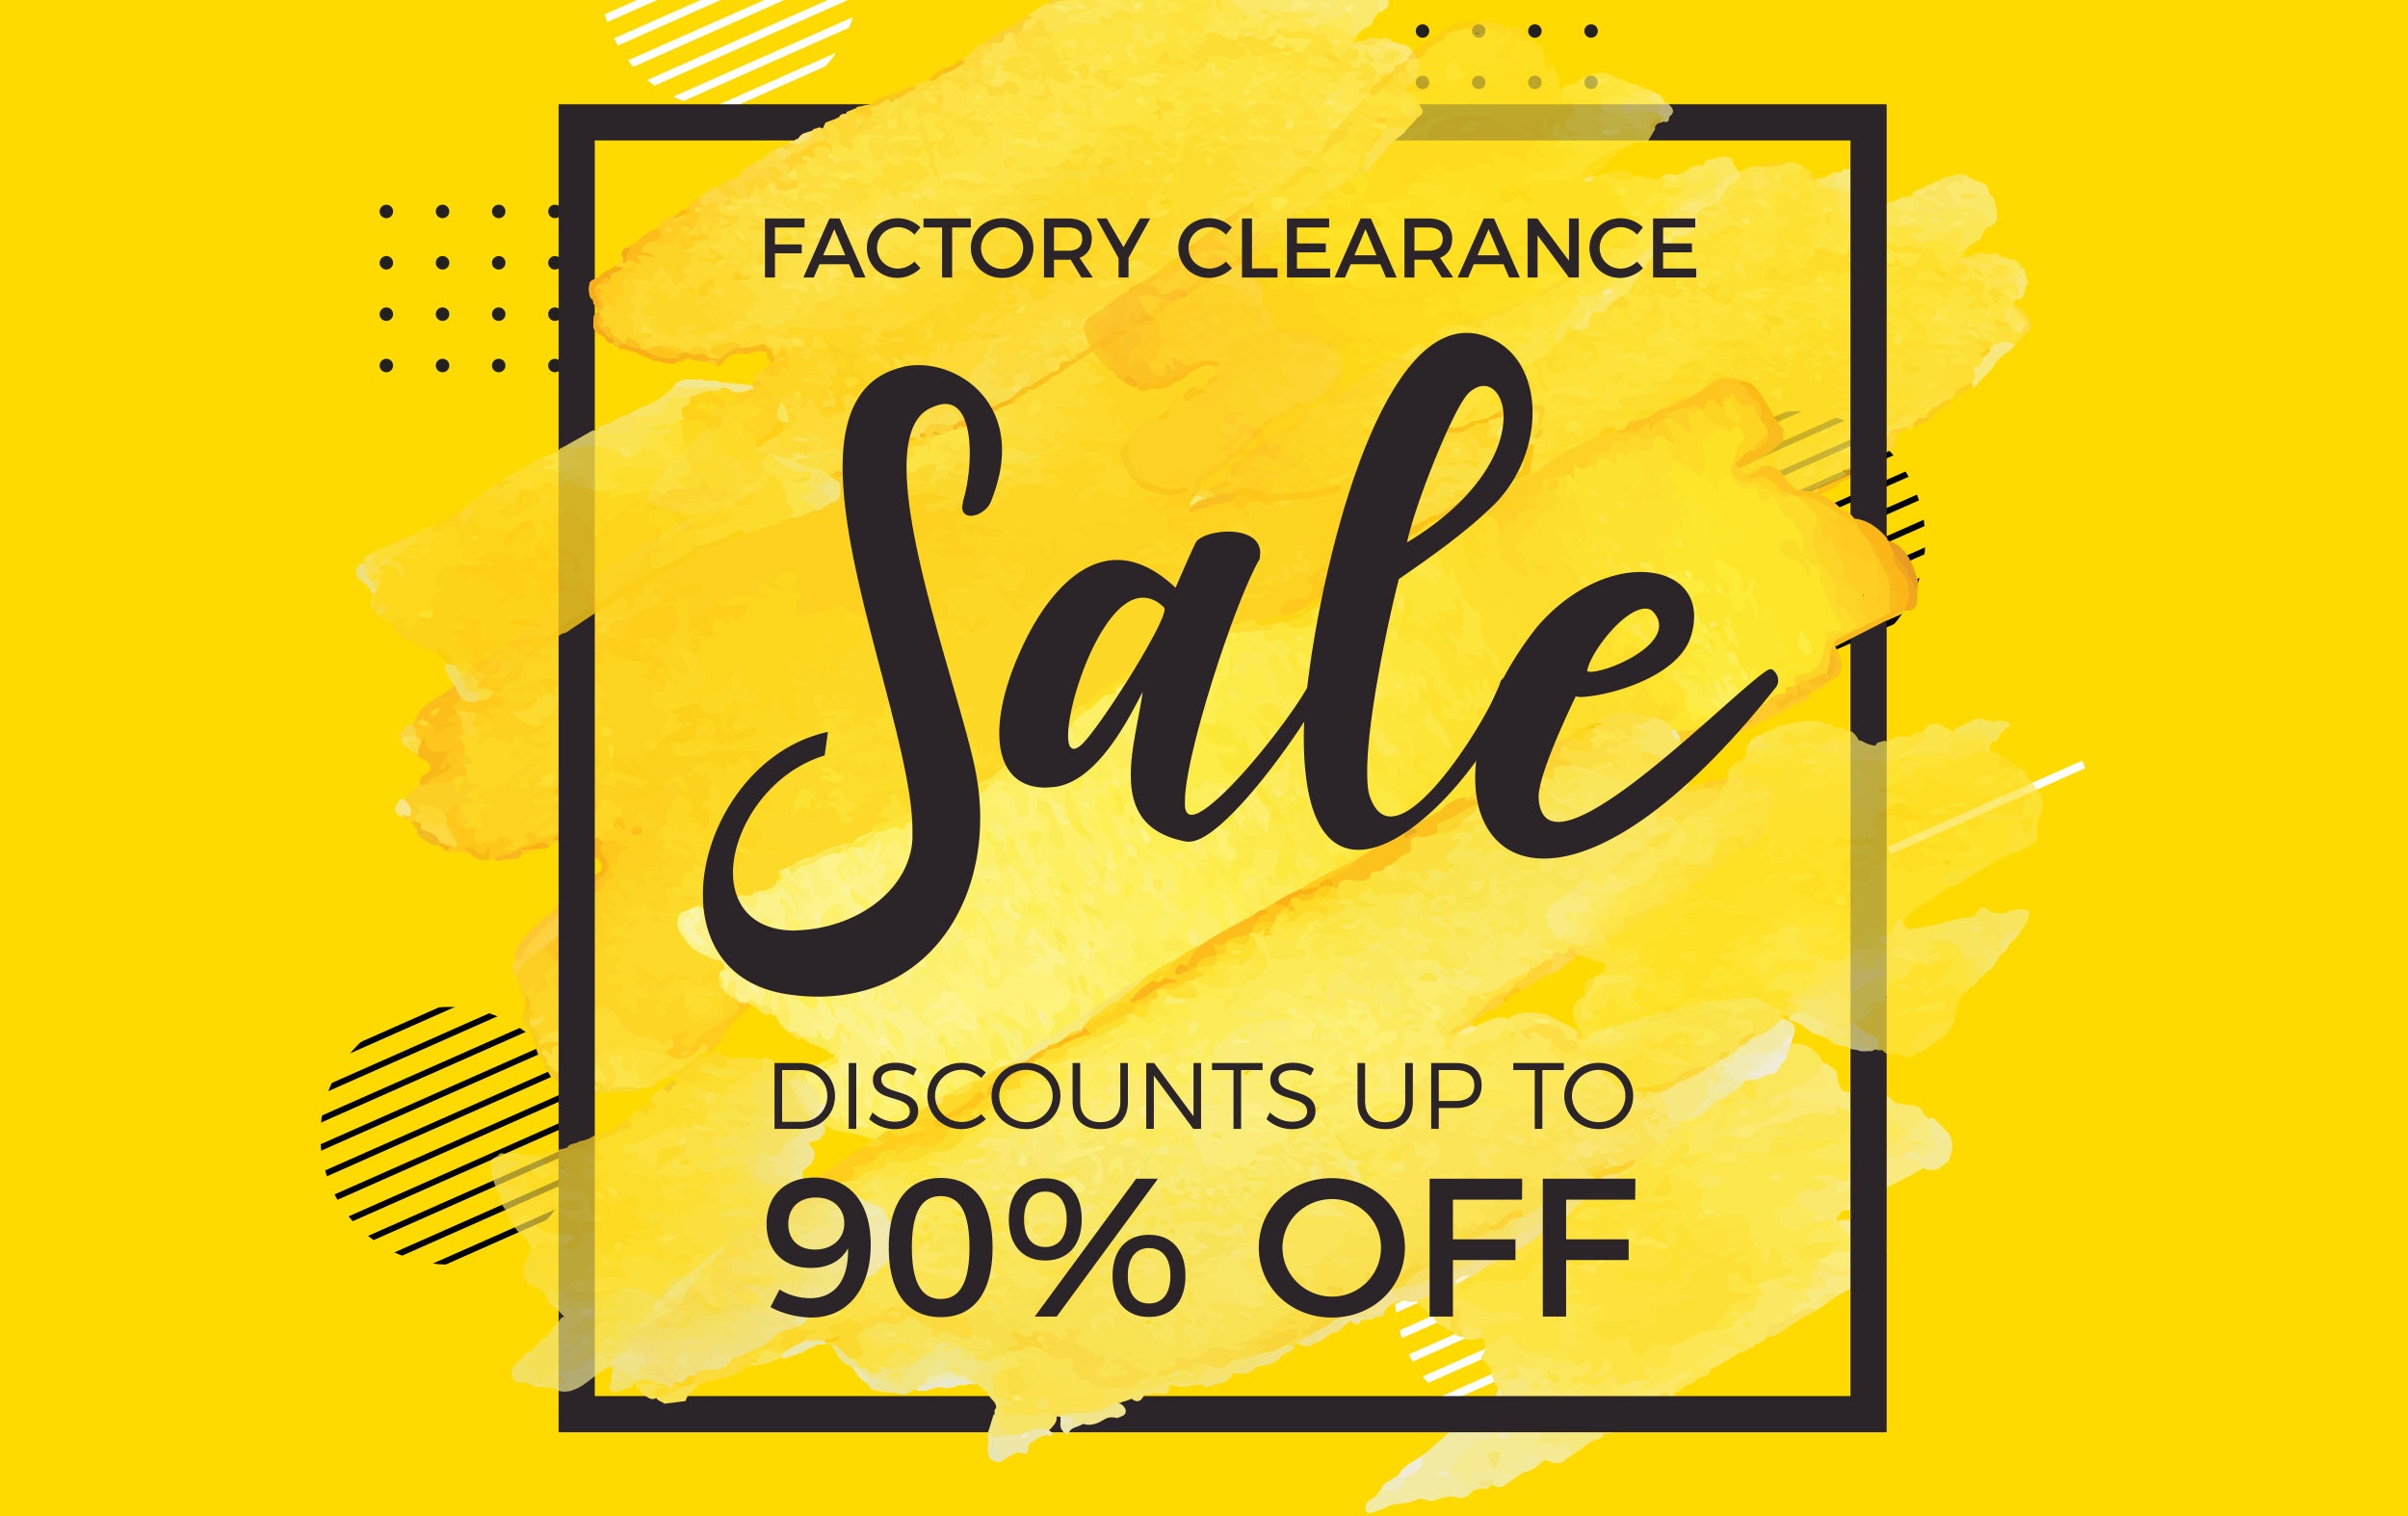 Shearer Candles' Spring Clean Factory Sale